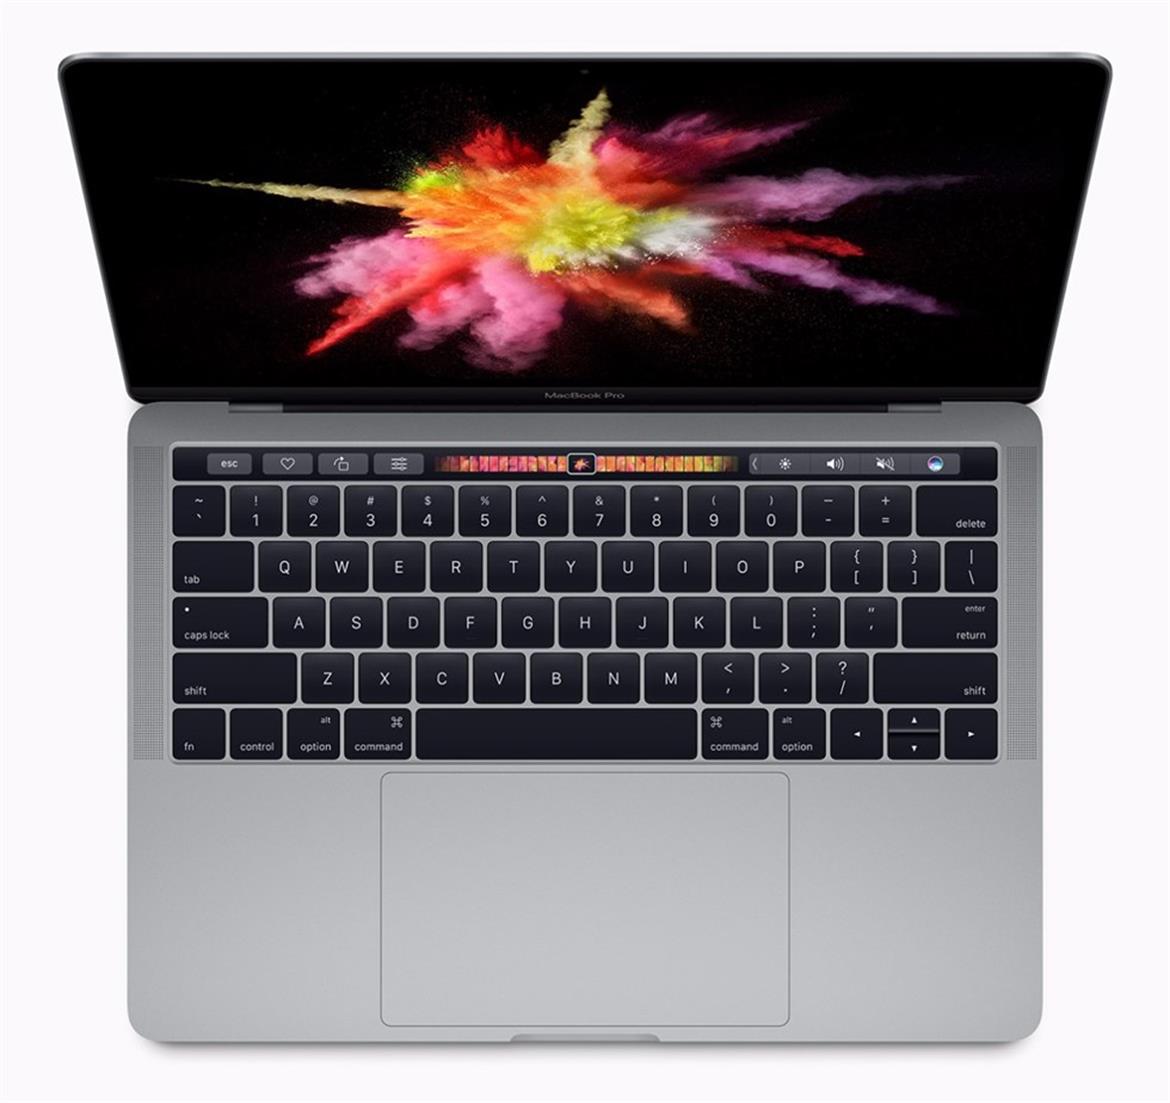 Apple’s MacBook Pro No Longer Recommended By Consumer Reports Due To Wild Battery Life Fluctuations